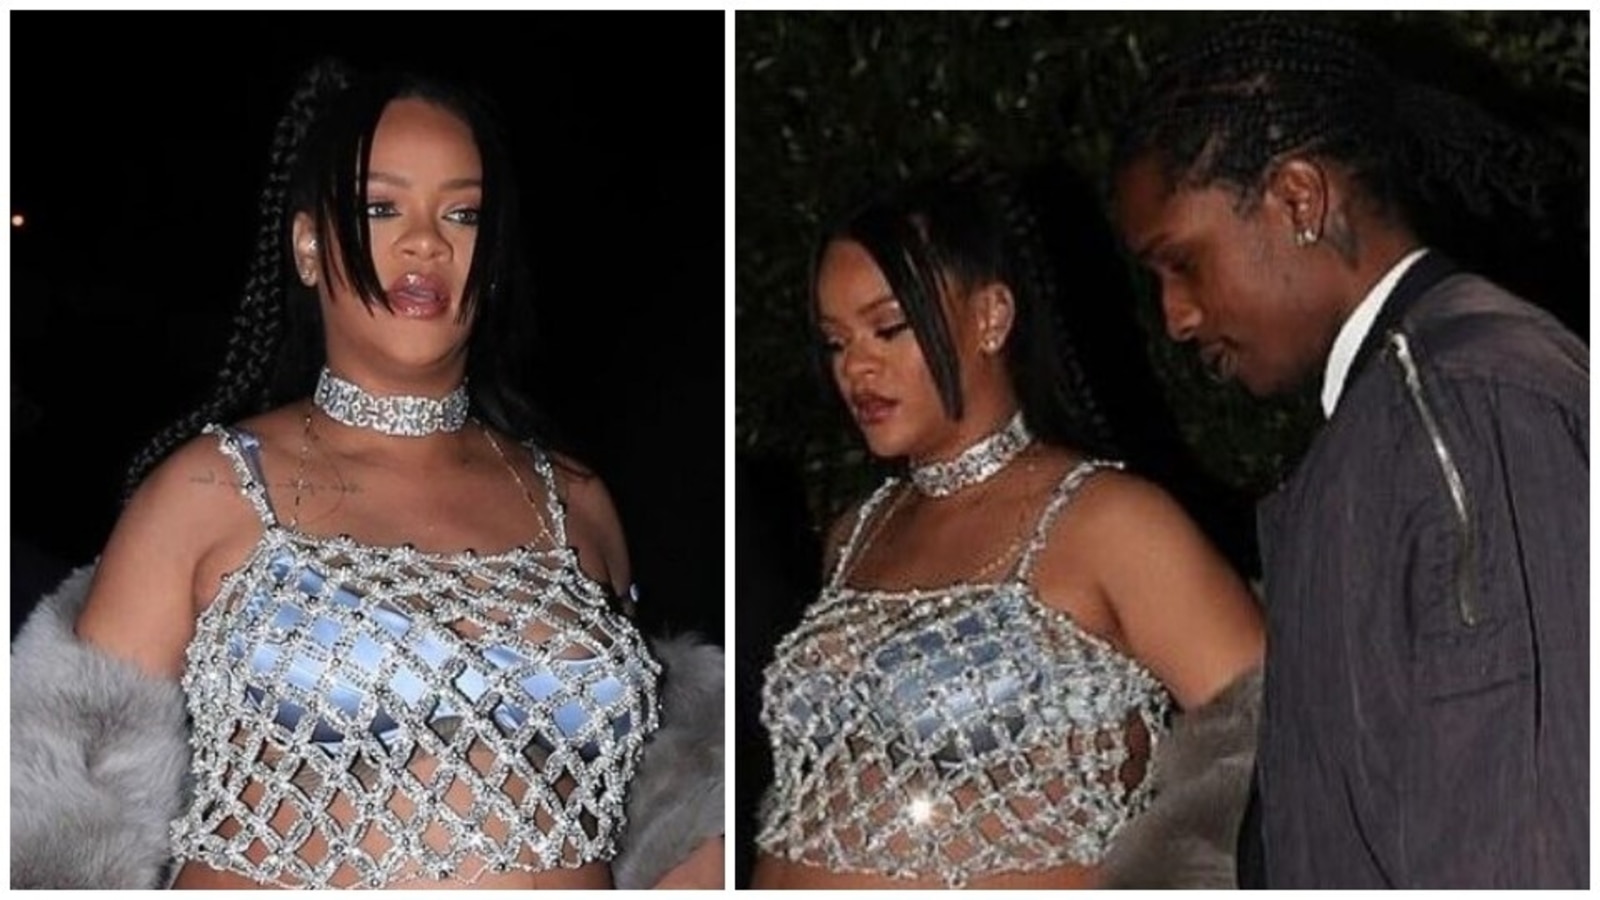 Rihanna pregnant is a fashion moment: Her baby bump maternity style